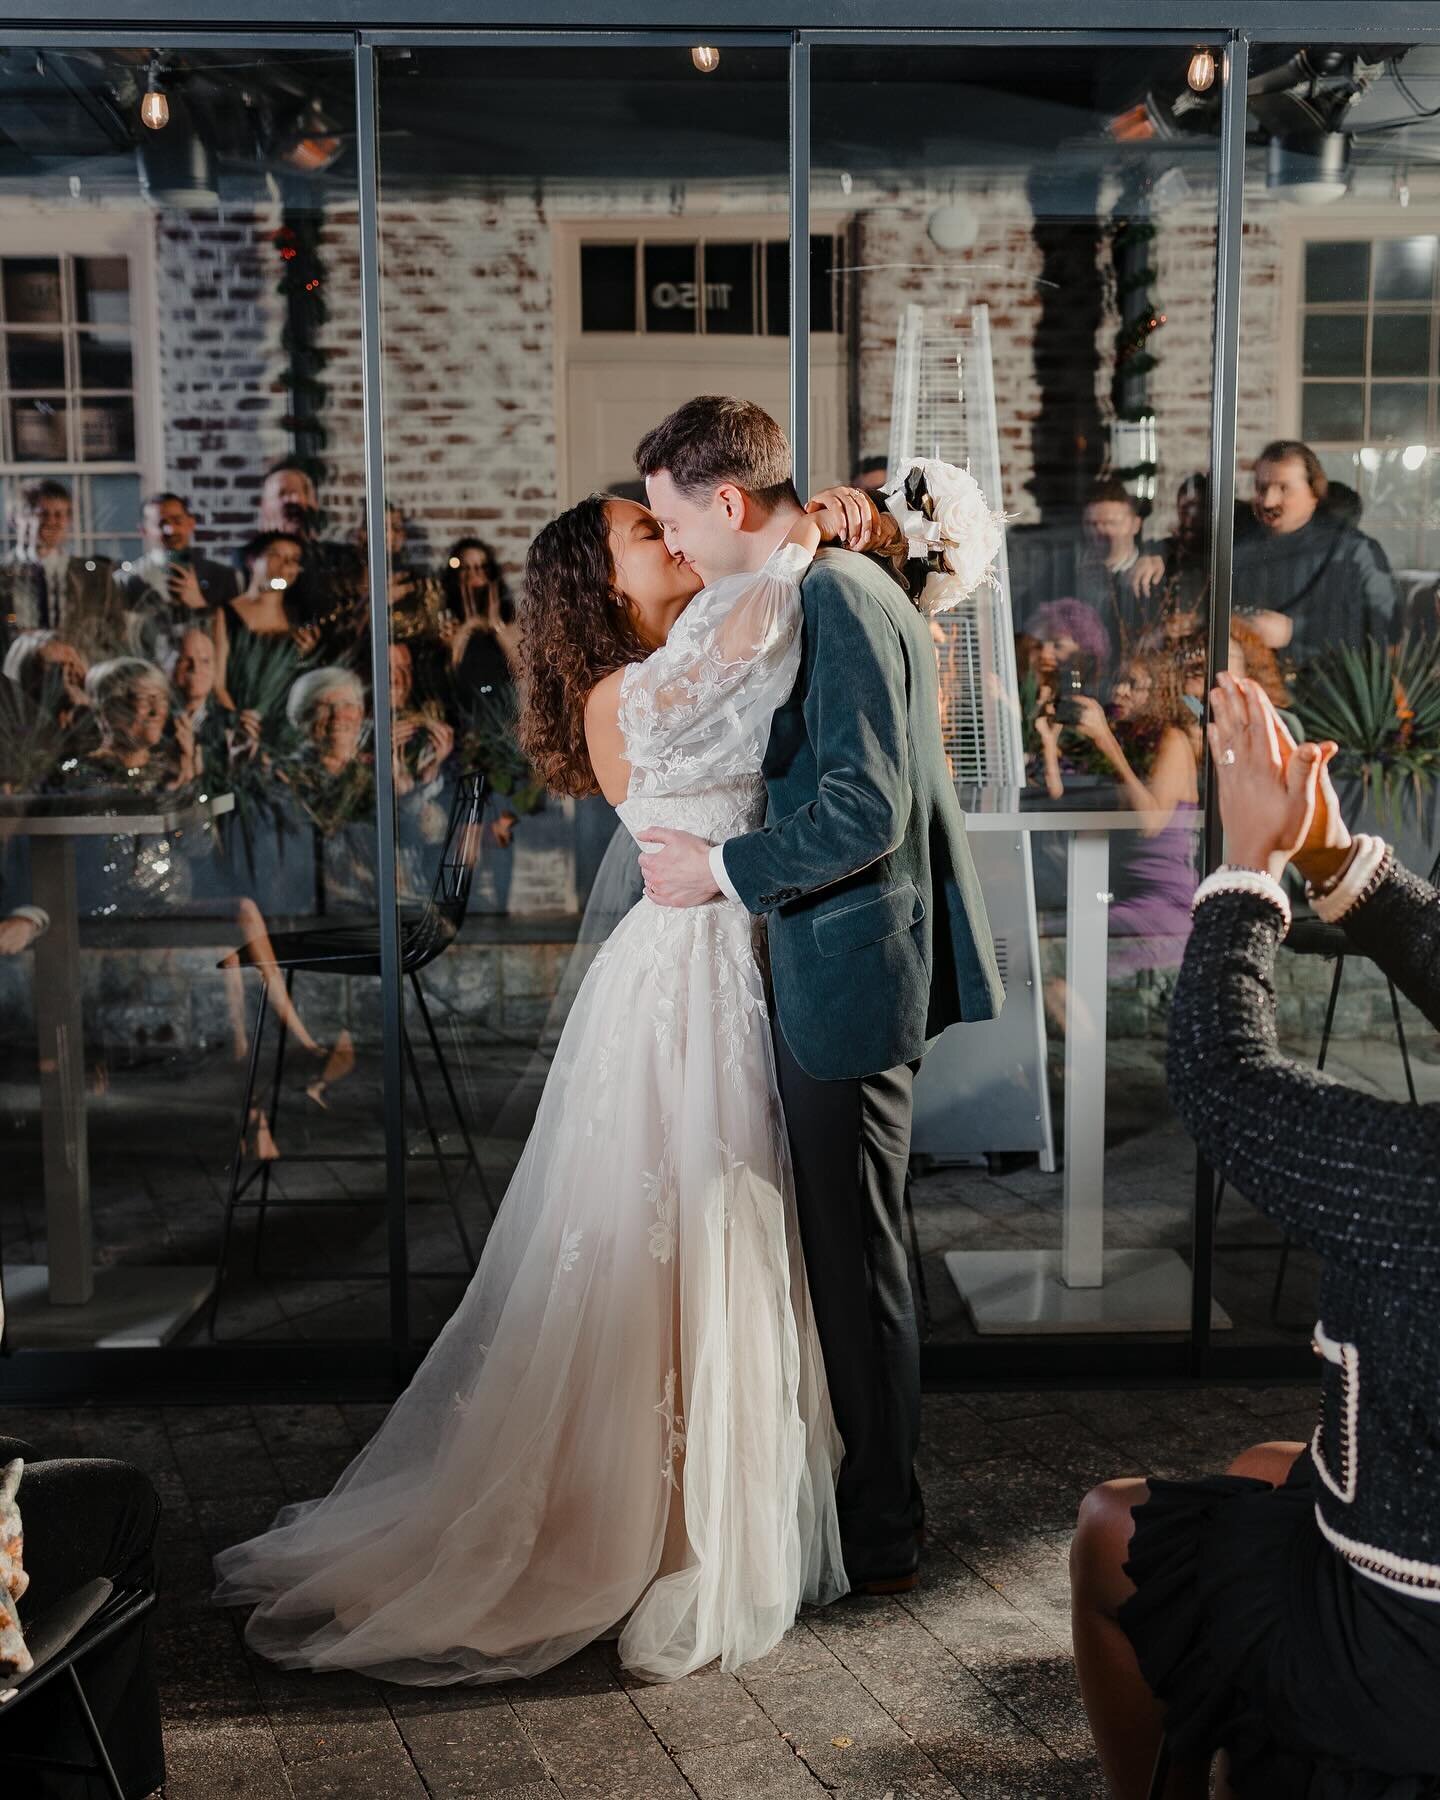 Our 1st post of 2024 is dedicated to my last couple, I + A, who had a lovely NYE wedding last night. The chilly winter night and twinkling lights of @thewharfdc made everything looked extra dreamy! 🥹✨

They told me that this was supposed to be just 